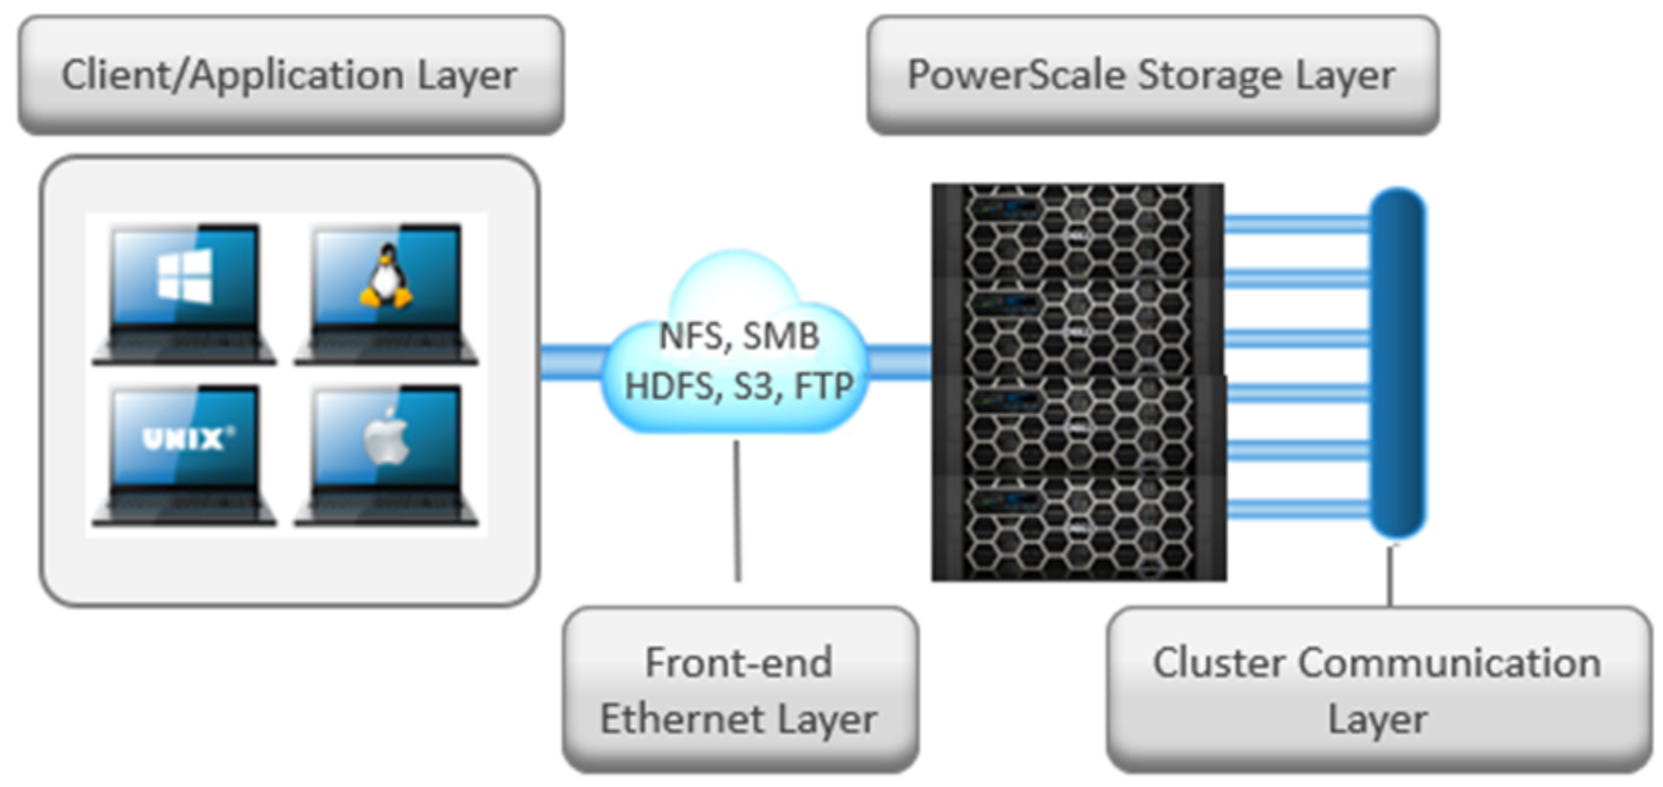 Graphic showing the high-level PowerScale clustered NAS architecture, highlighting the client/application layer, front-end ethernet and protocol layer, storage layer, and backend cluster intra-cluster communication layer.